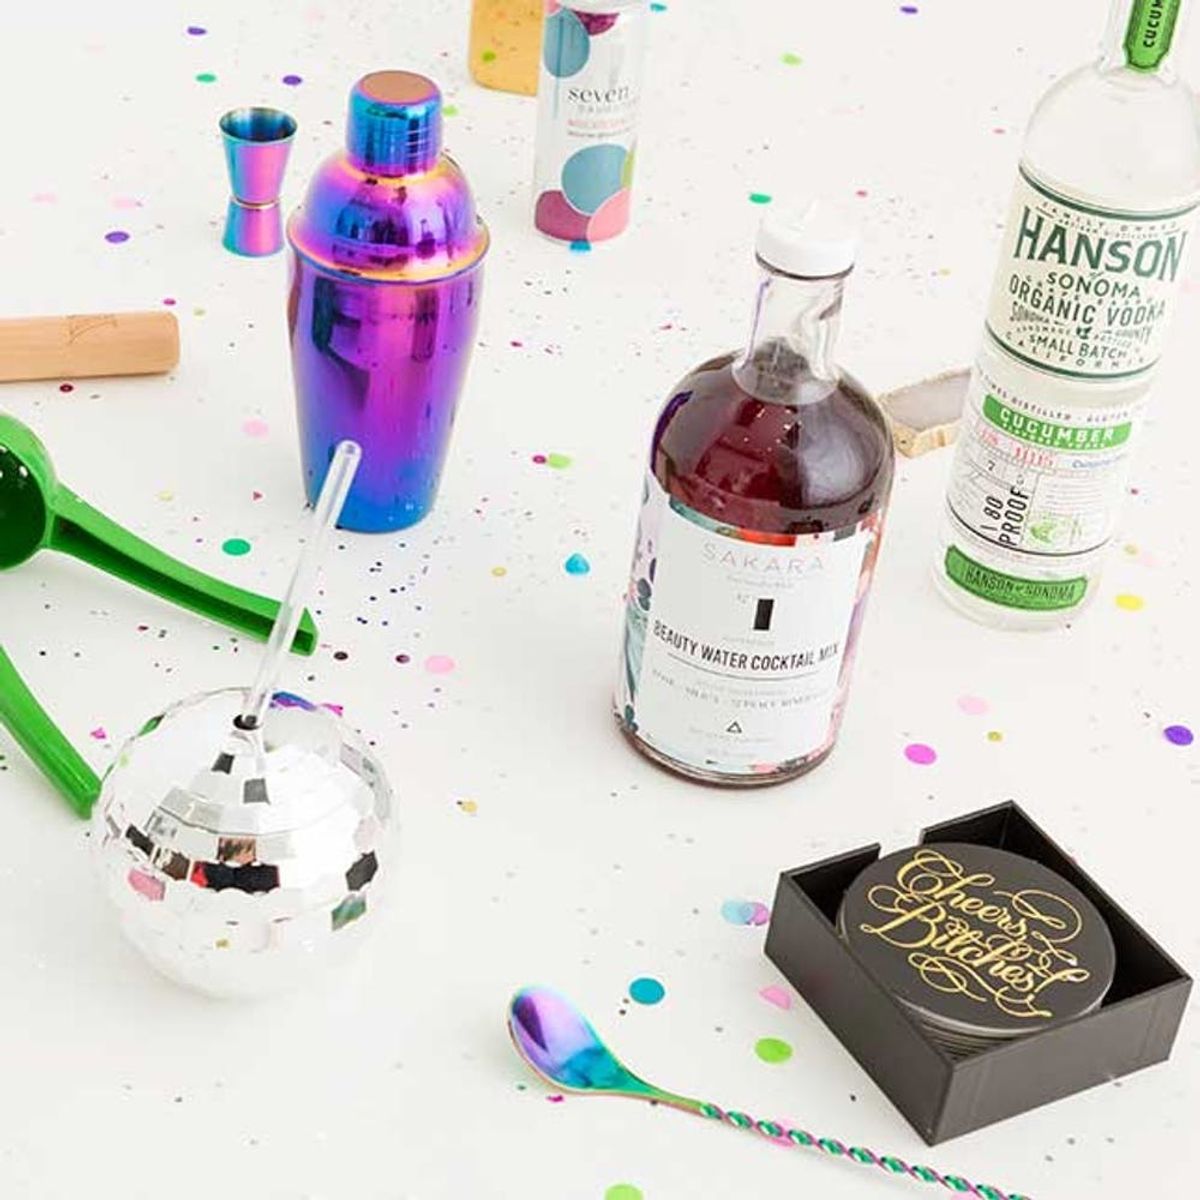 13 Boozy-ful Gifts for the Cocktail Lover